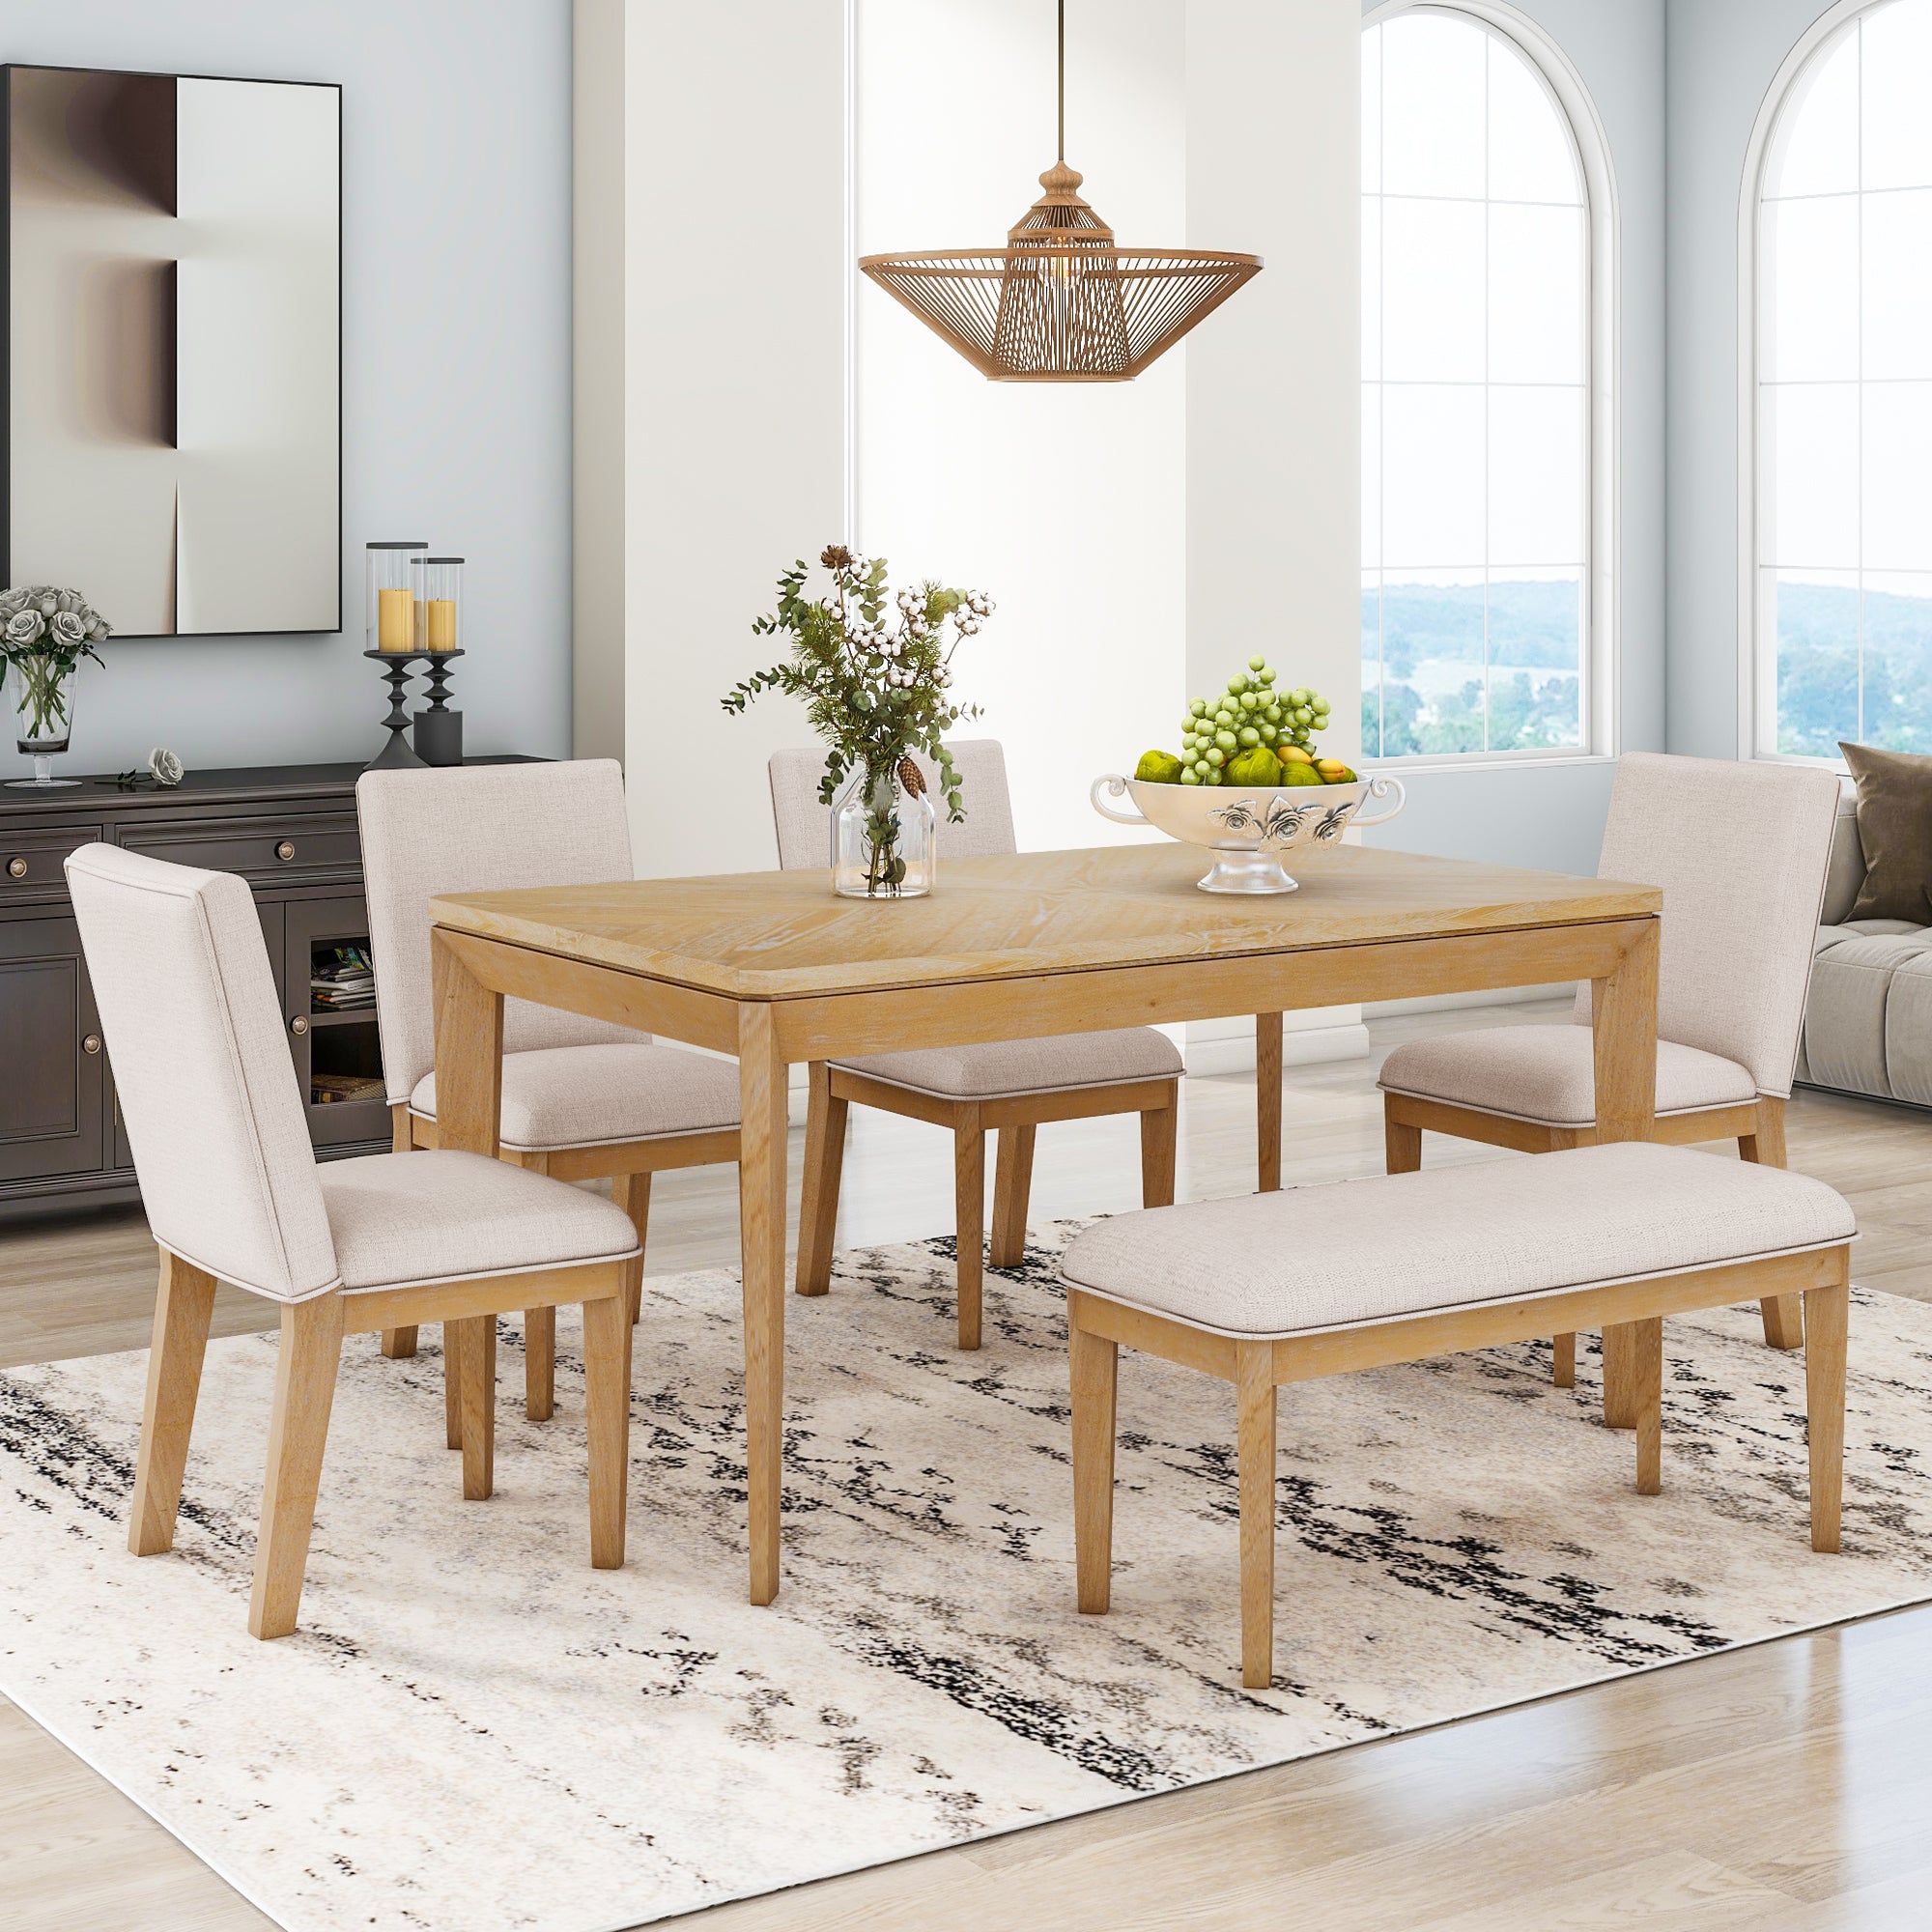 Bellemave 6-Piece Farmhouse Dining Table Set with Upholstered Dining Chairs and Bench Bellemave